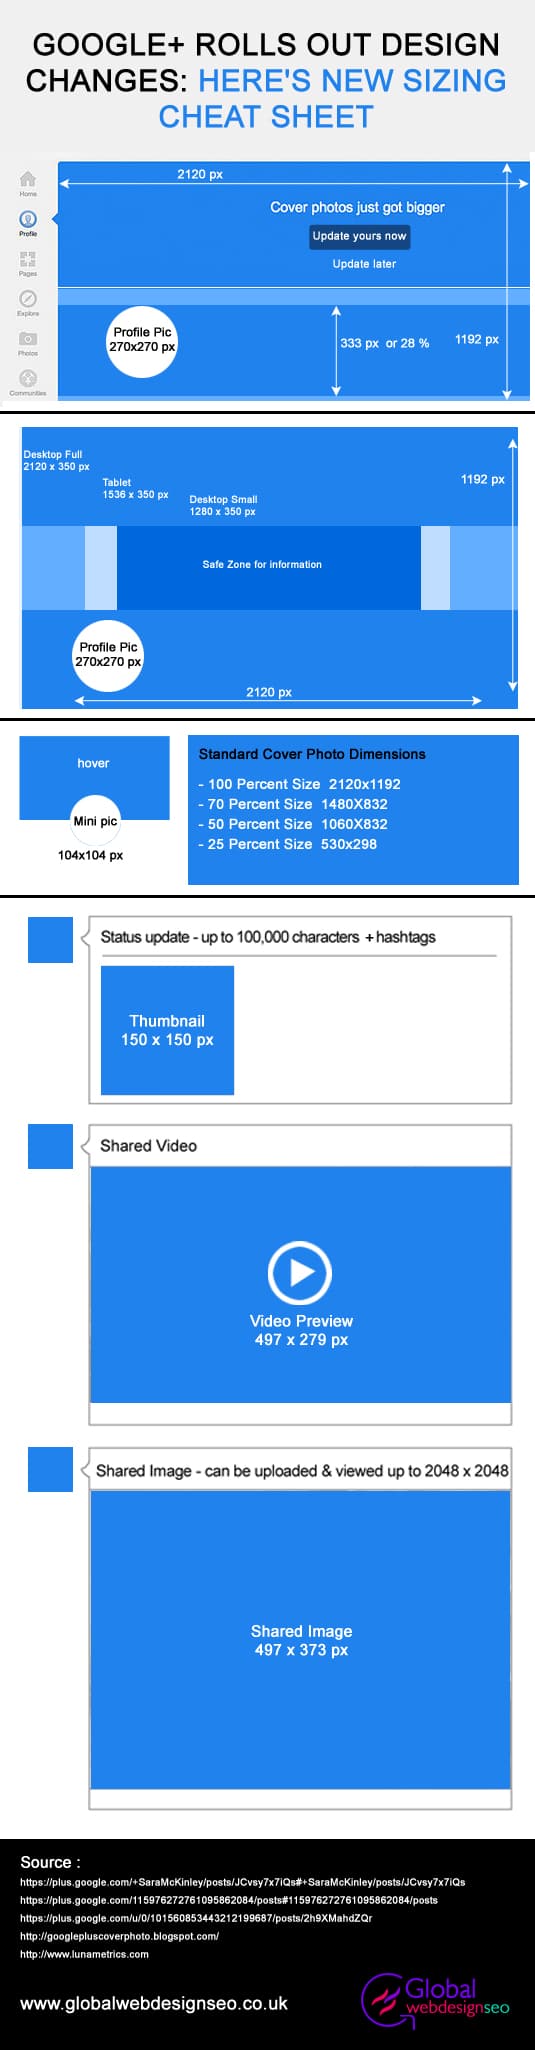 Image Sizing Guide For Redesigned Google+ [Infographic]